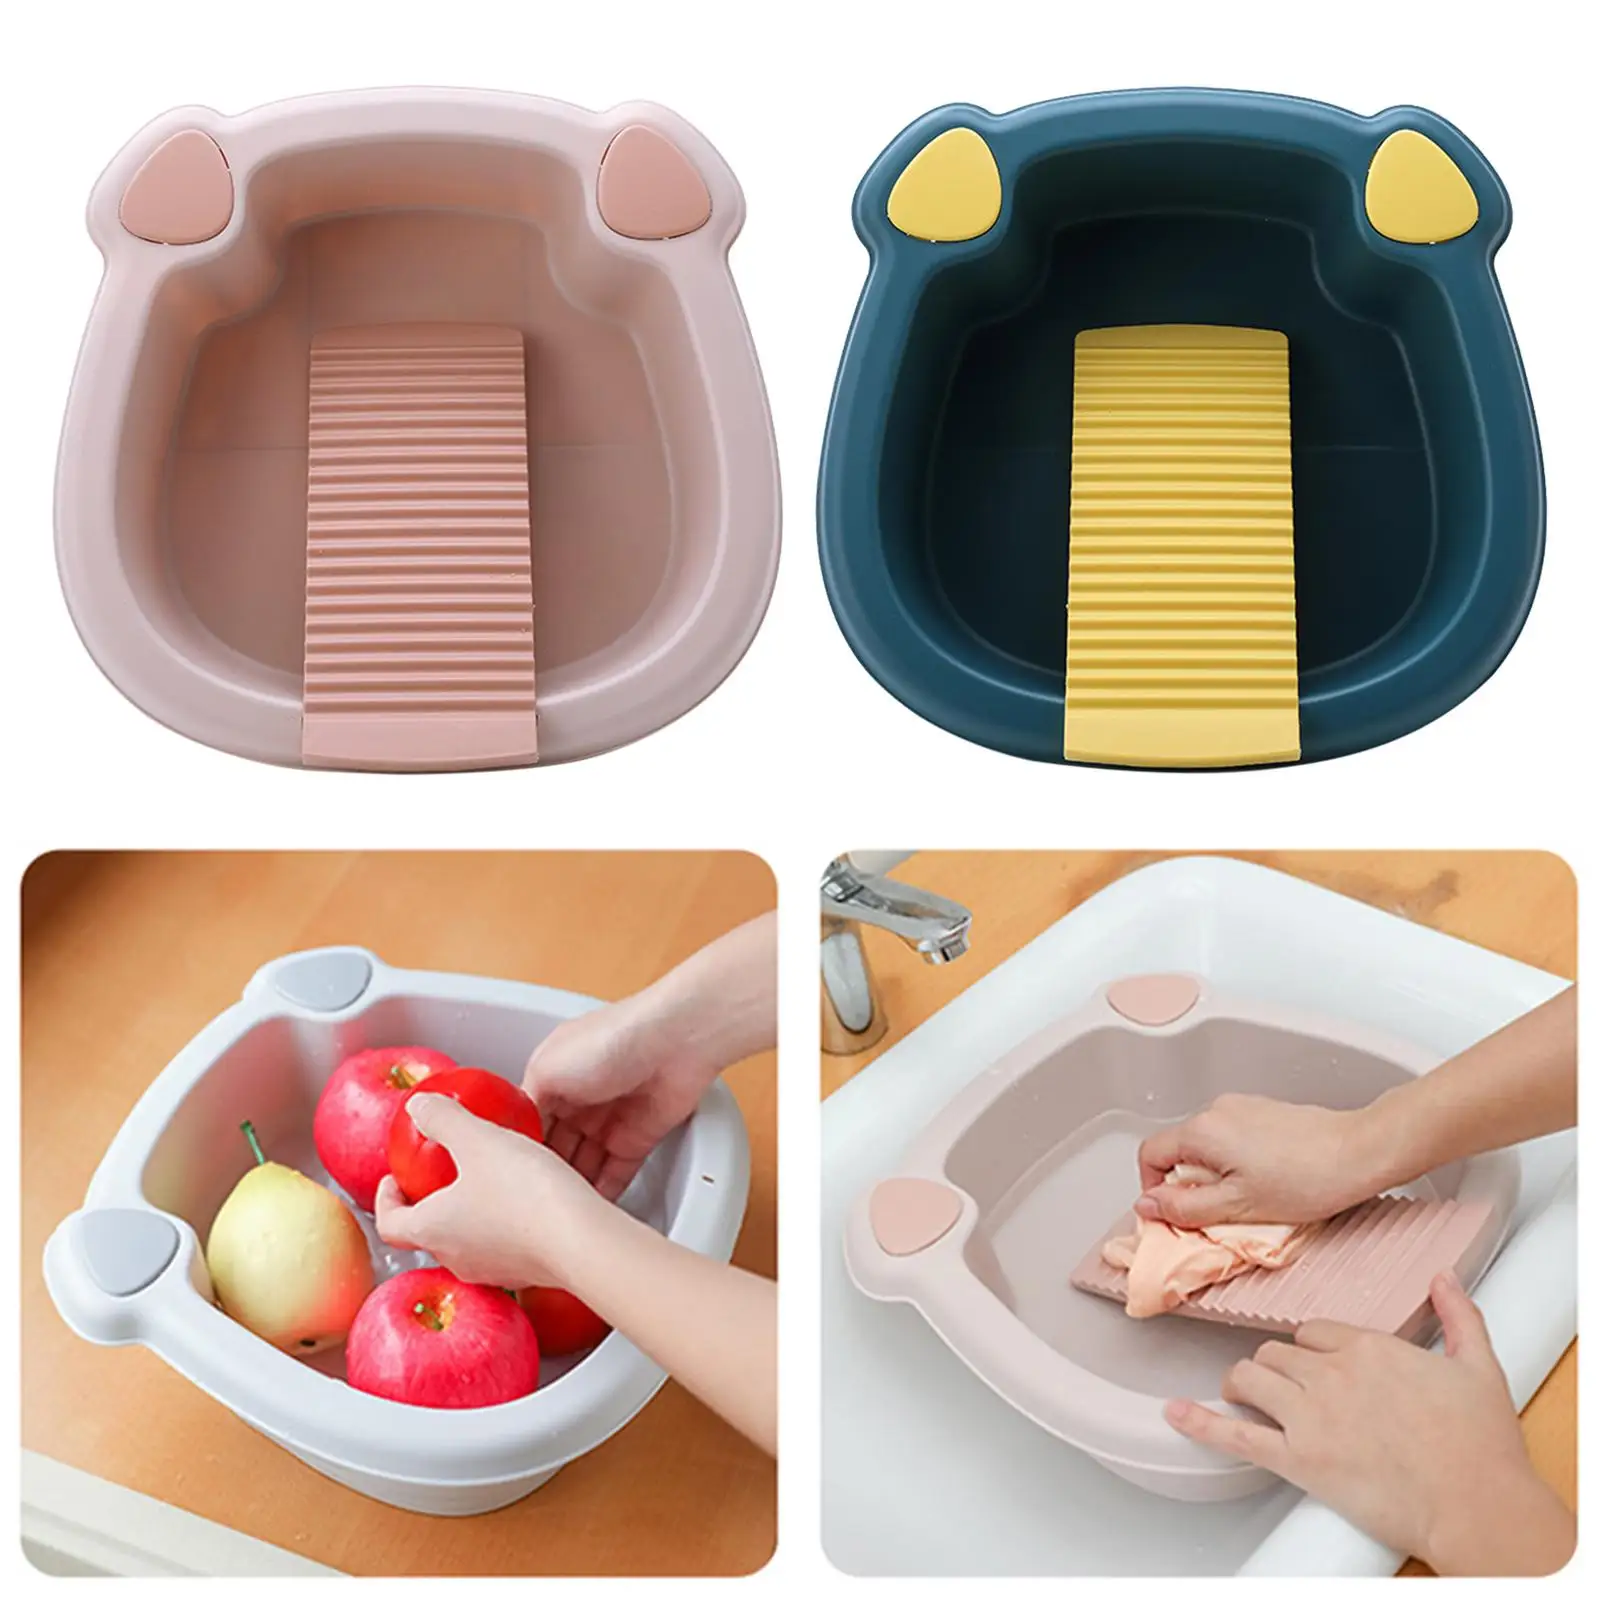 Convenient Washing Clothes Washboard Compact Non Slip Hand Washing Cute Lightweight Washtub for Blouses Home Shirts Pants